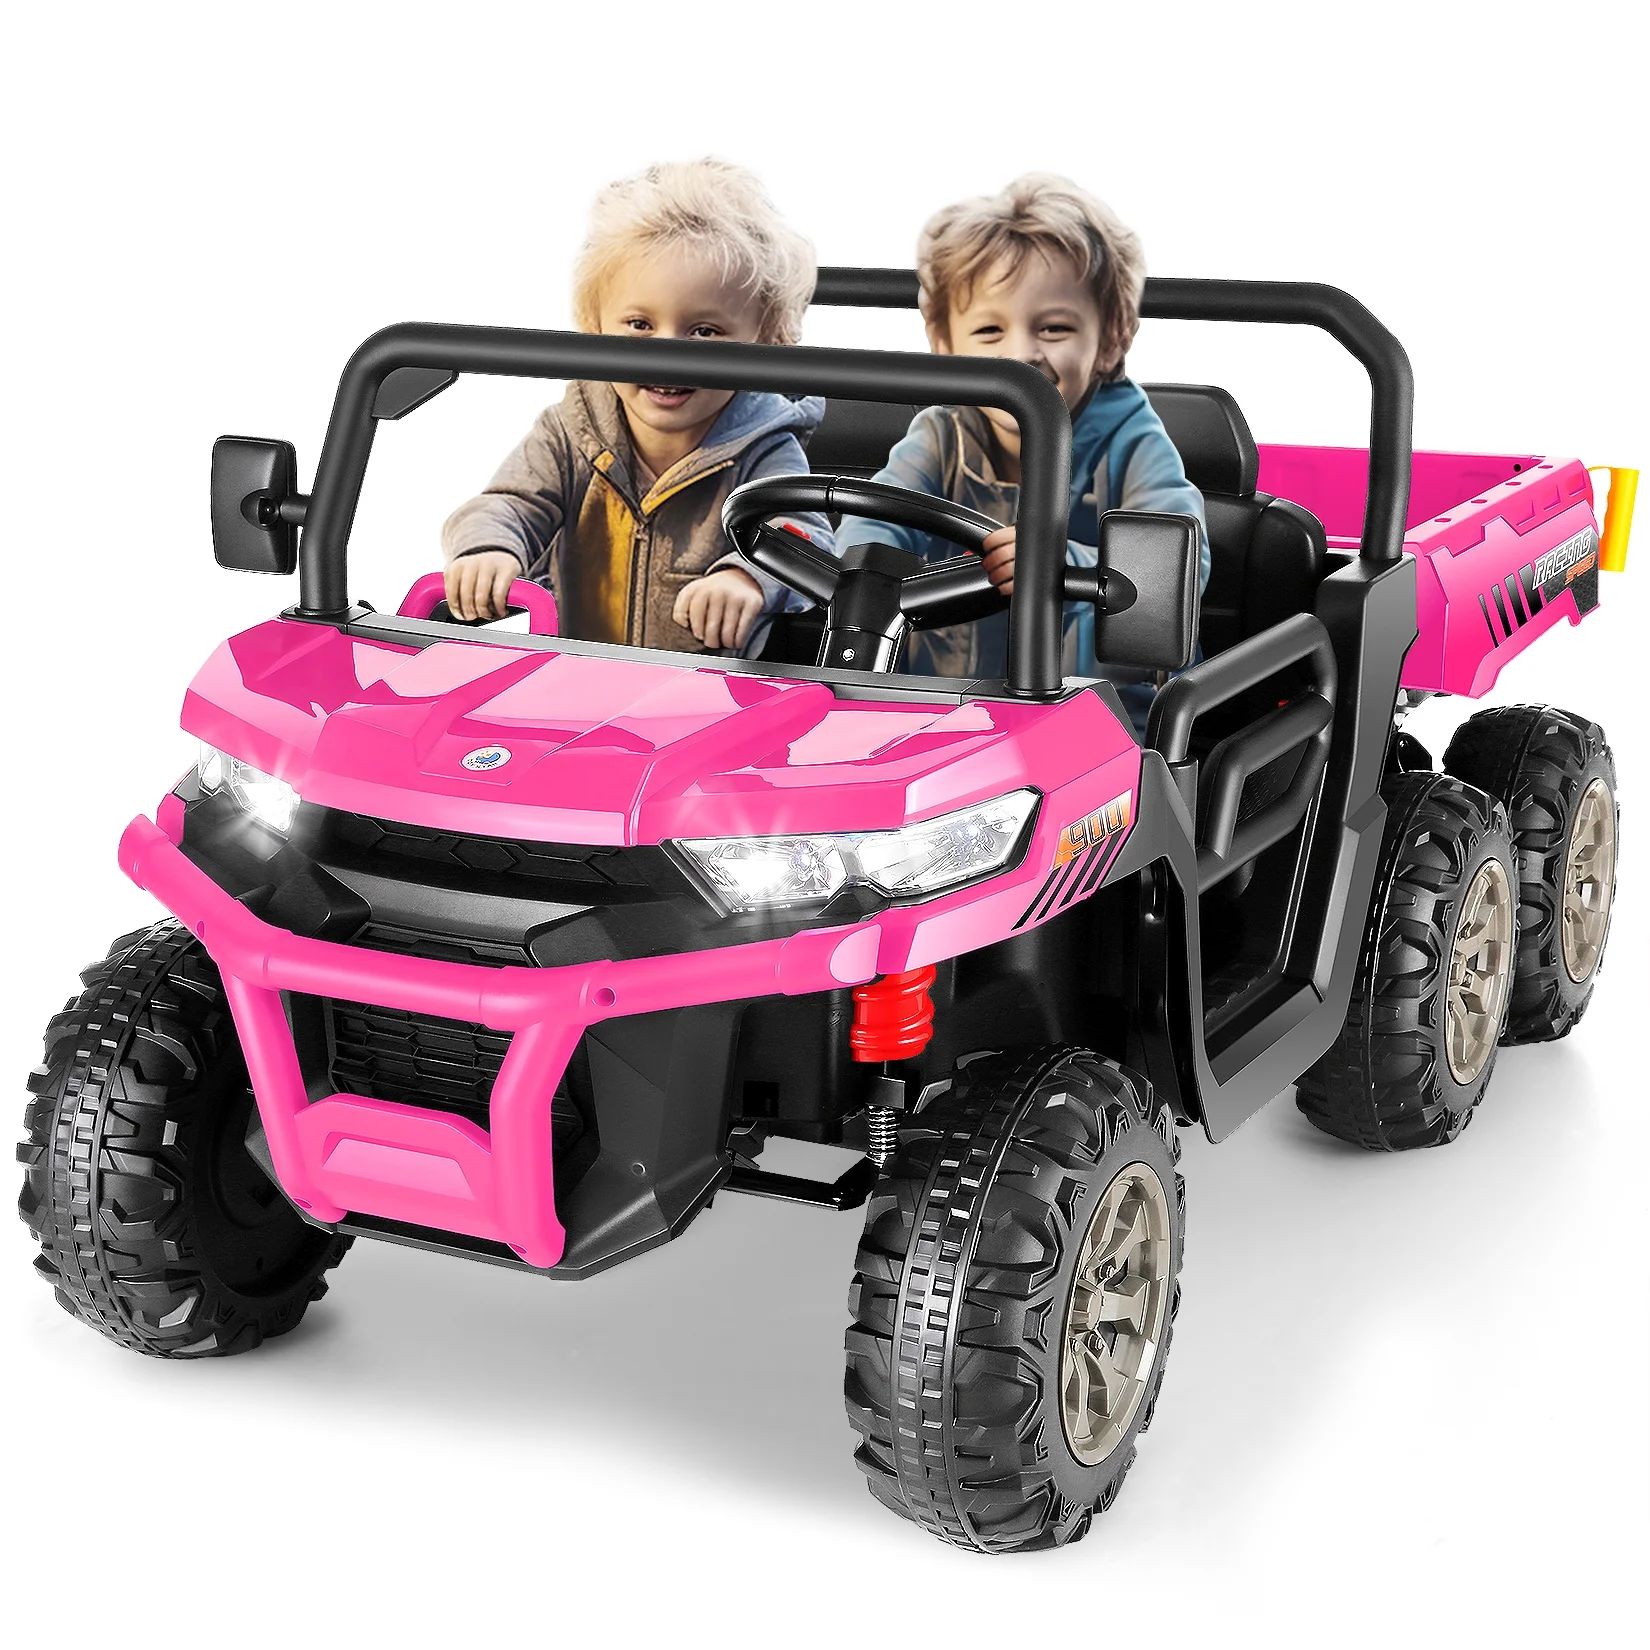 Funcid 24 Volt 4WD Kids Ride on Dump Truck with Remote Control, 2 Seater Electric Powered 6-Wheel... | Walmart (US)